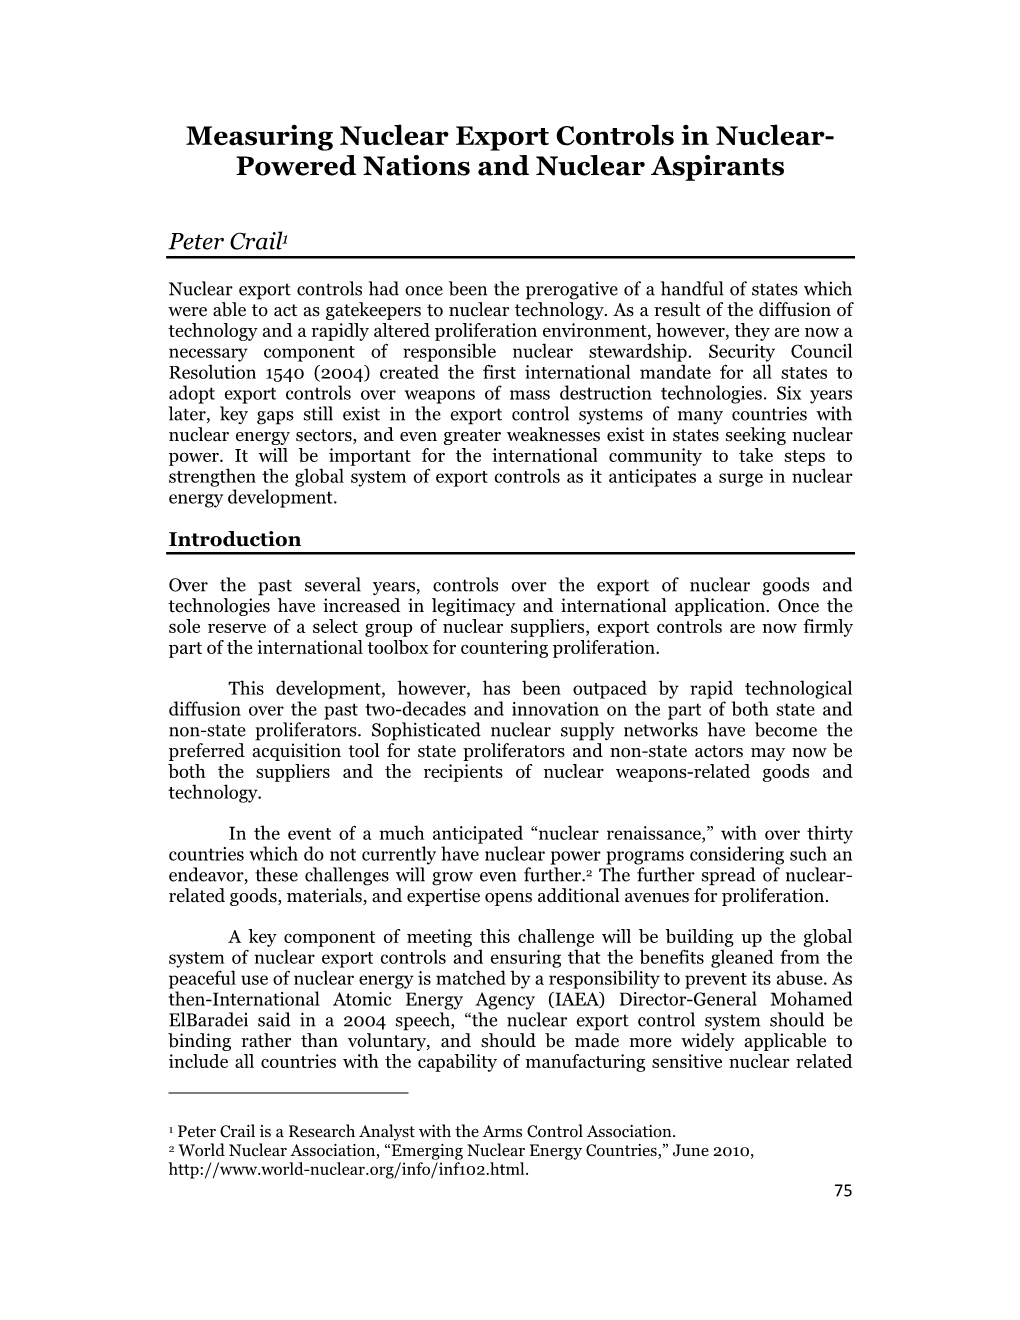 Measuring Nuclear Export Controls in Nuclear- Powered Nations and Nuclear Aspirants